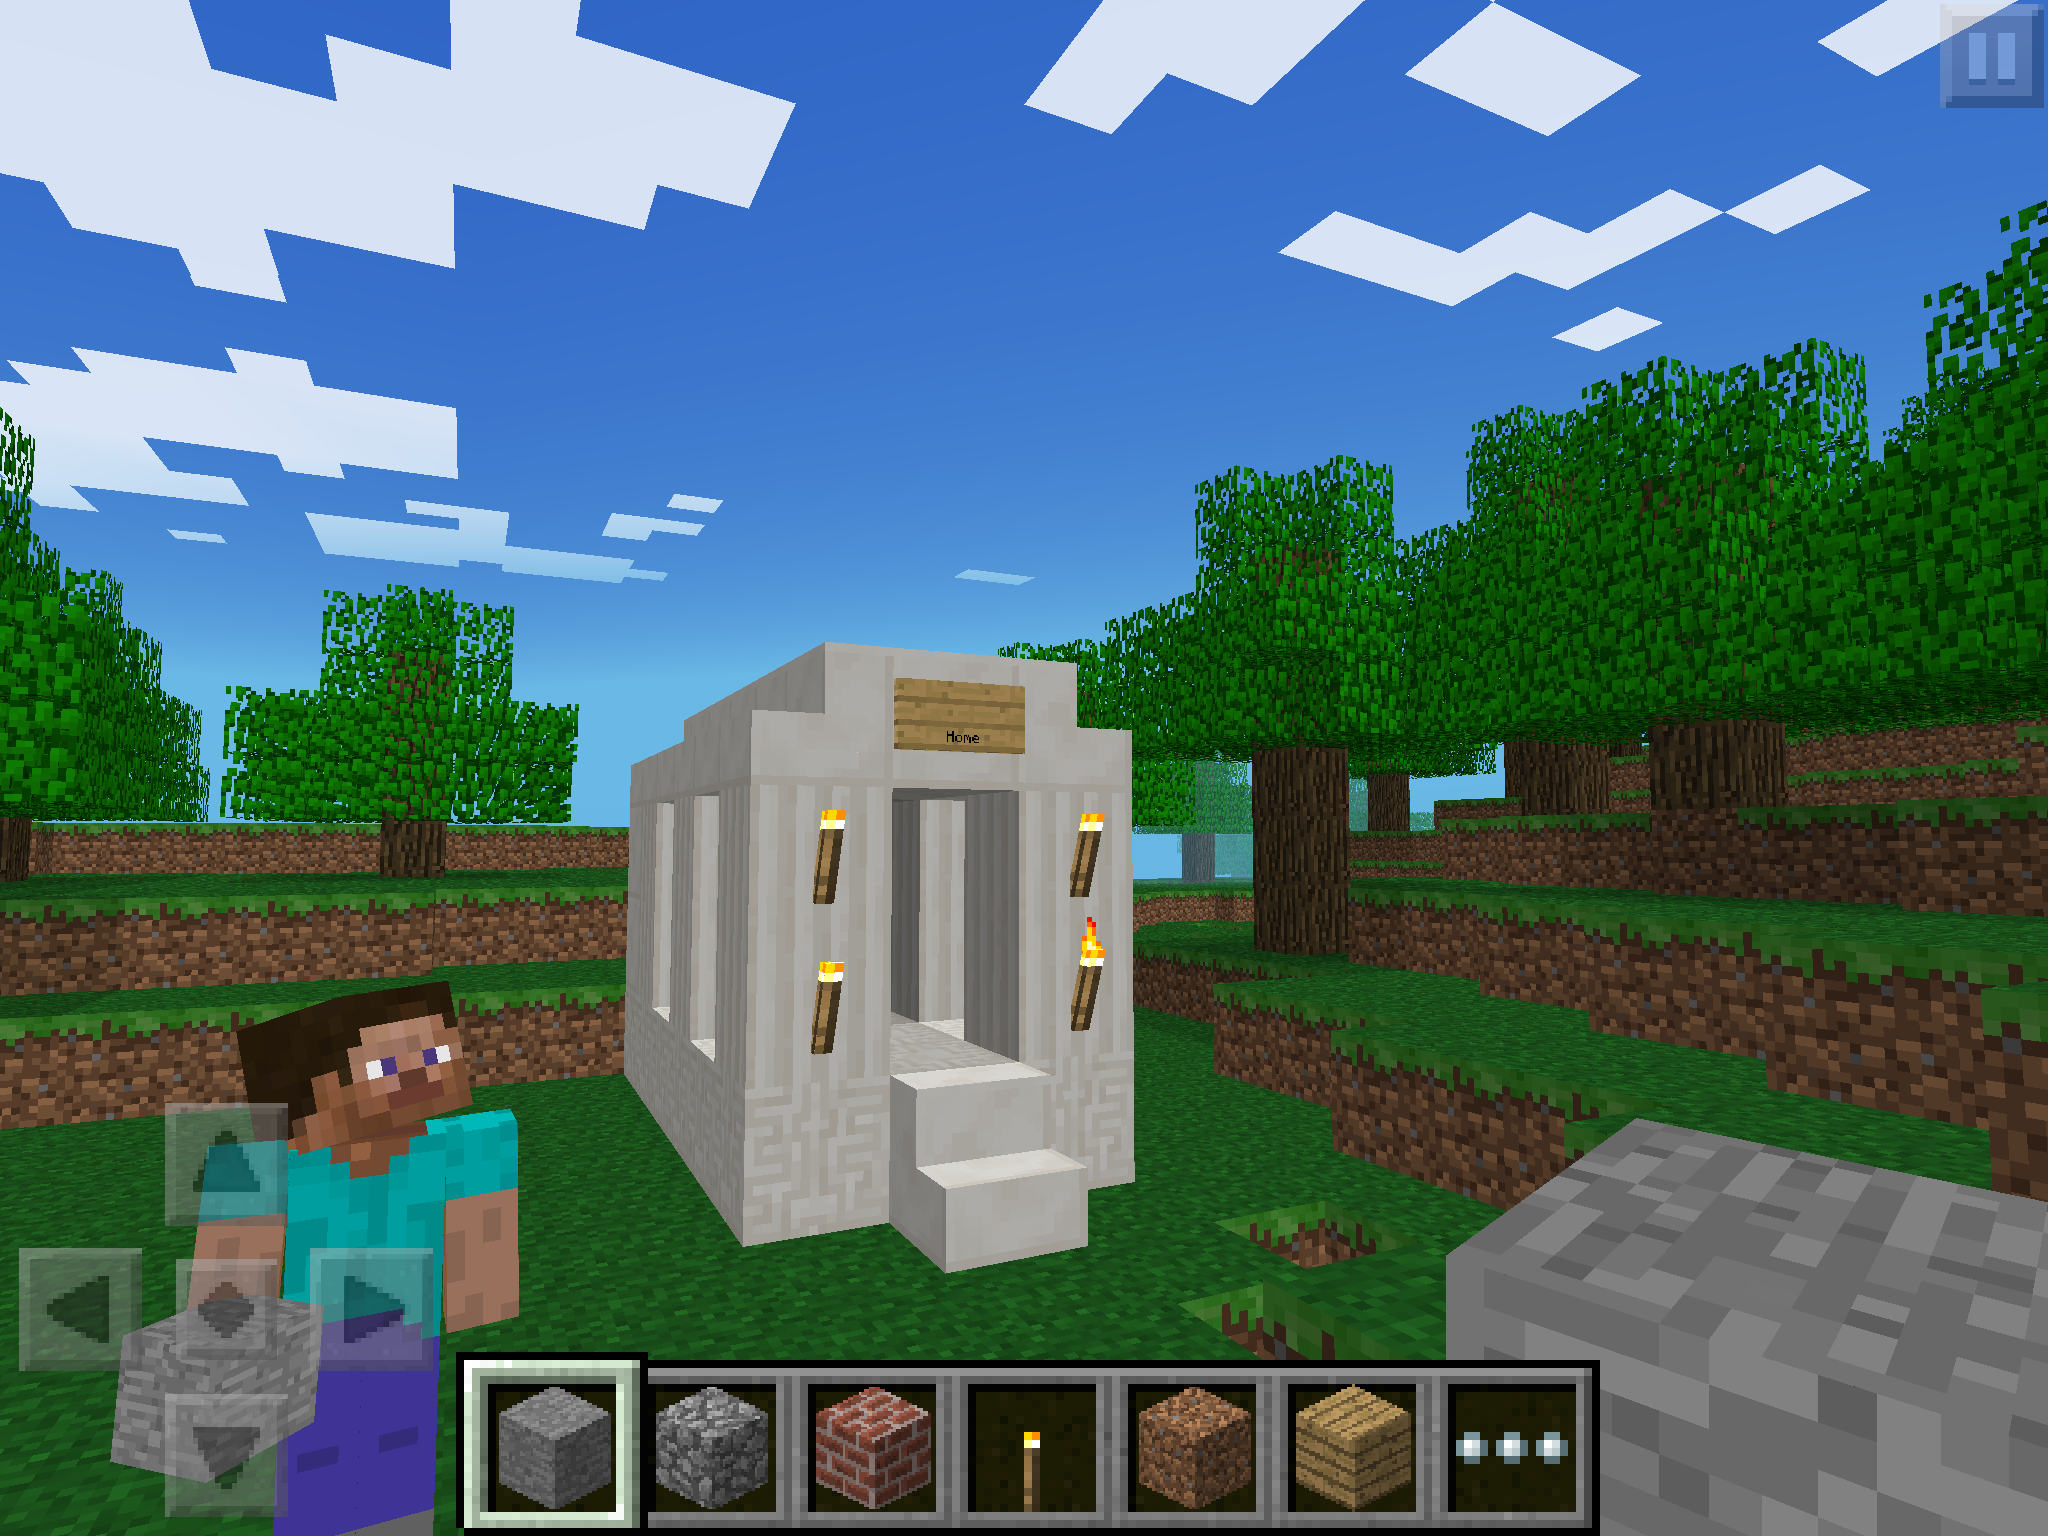 Minecraft - Pocket Edition now available for iPhone and iPad